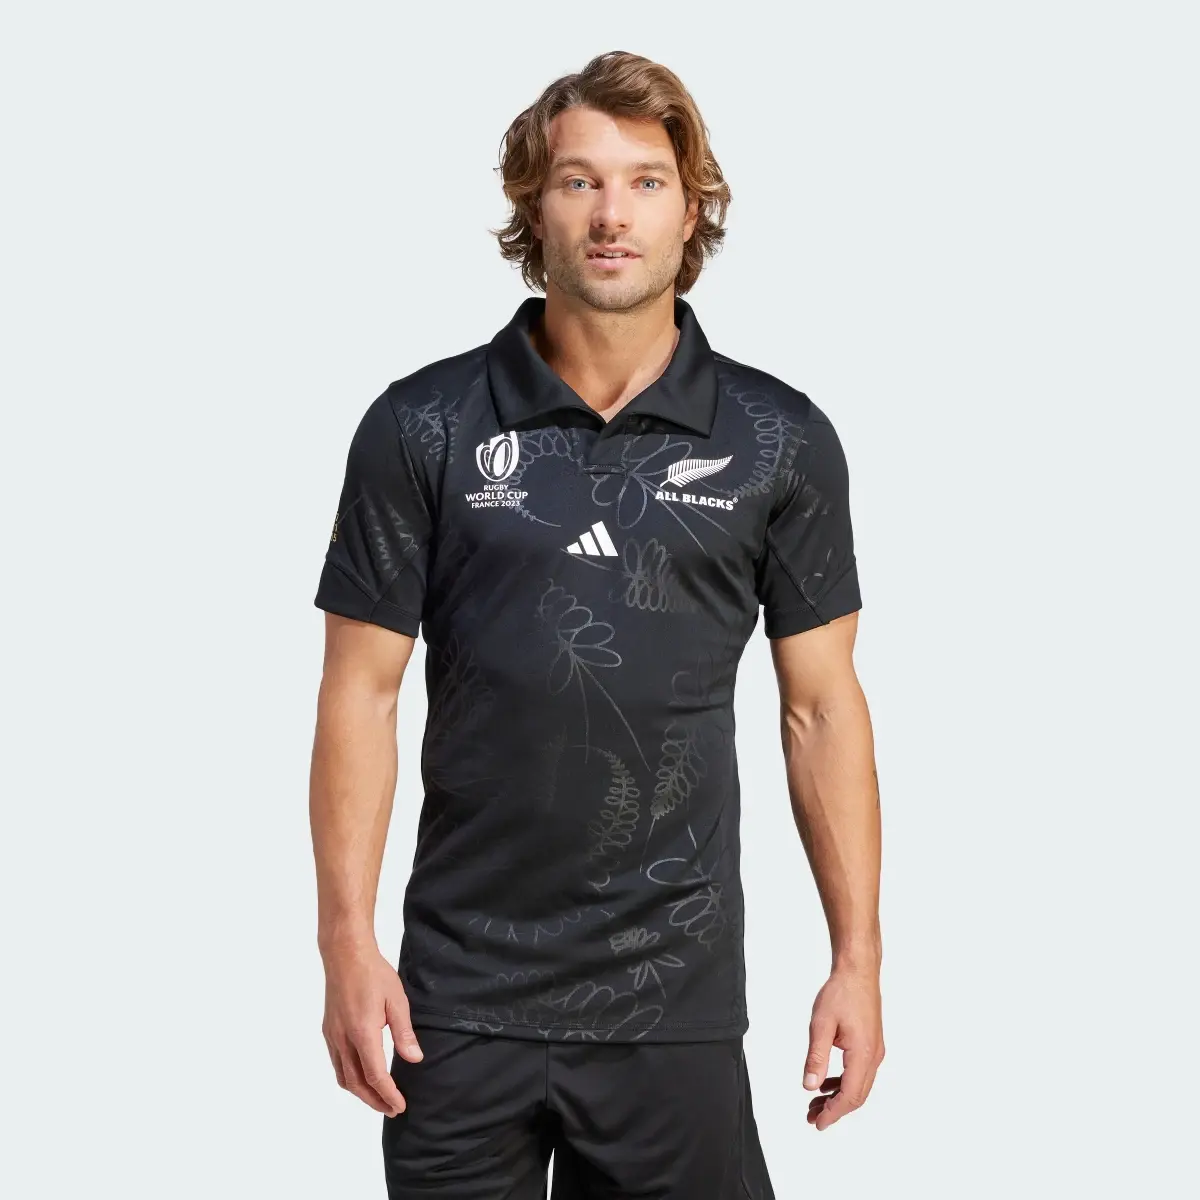 Adidas All Blacks Rugby Performance Home Jersey. 2